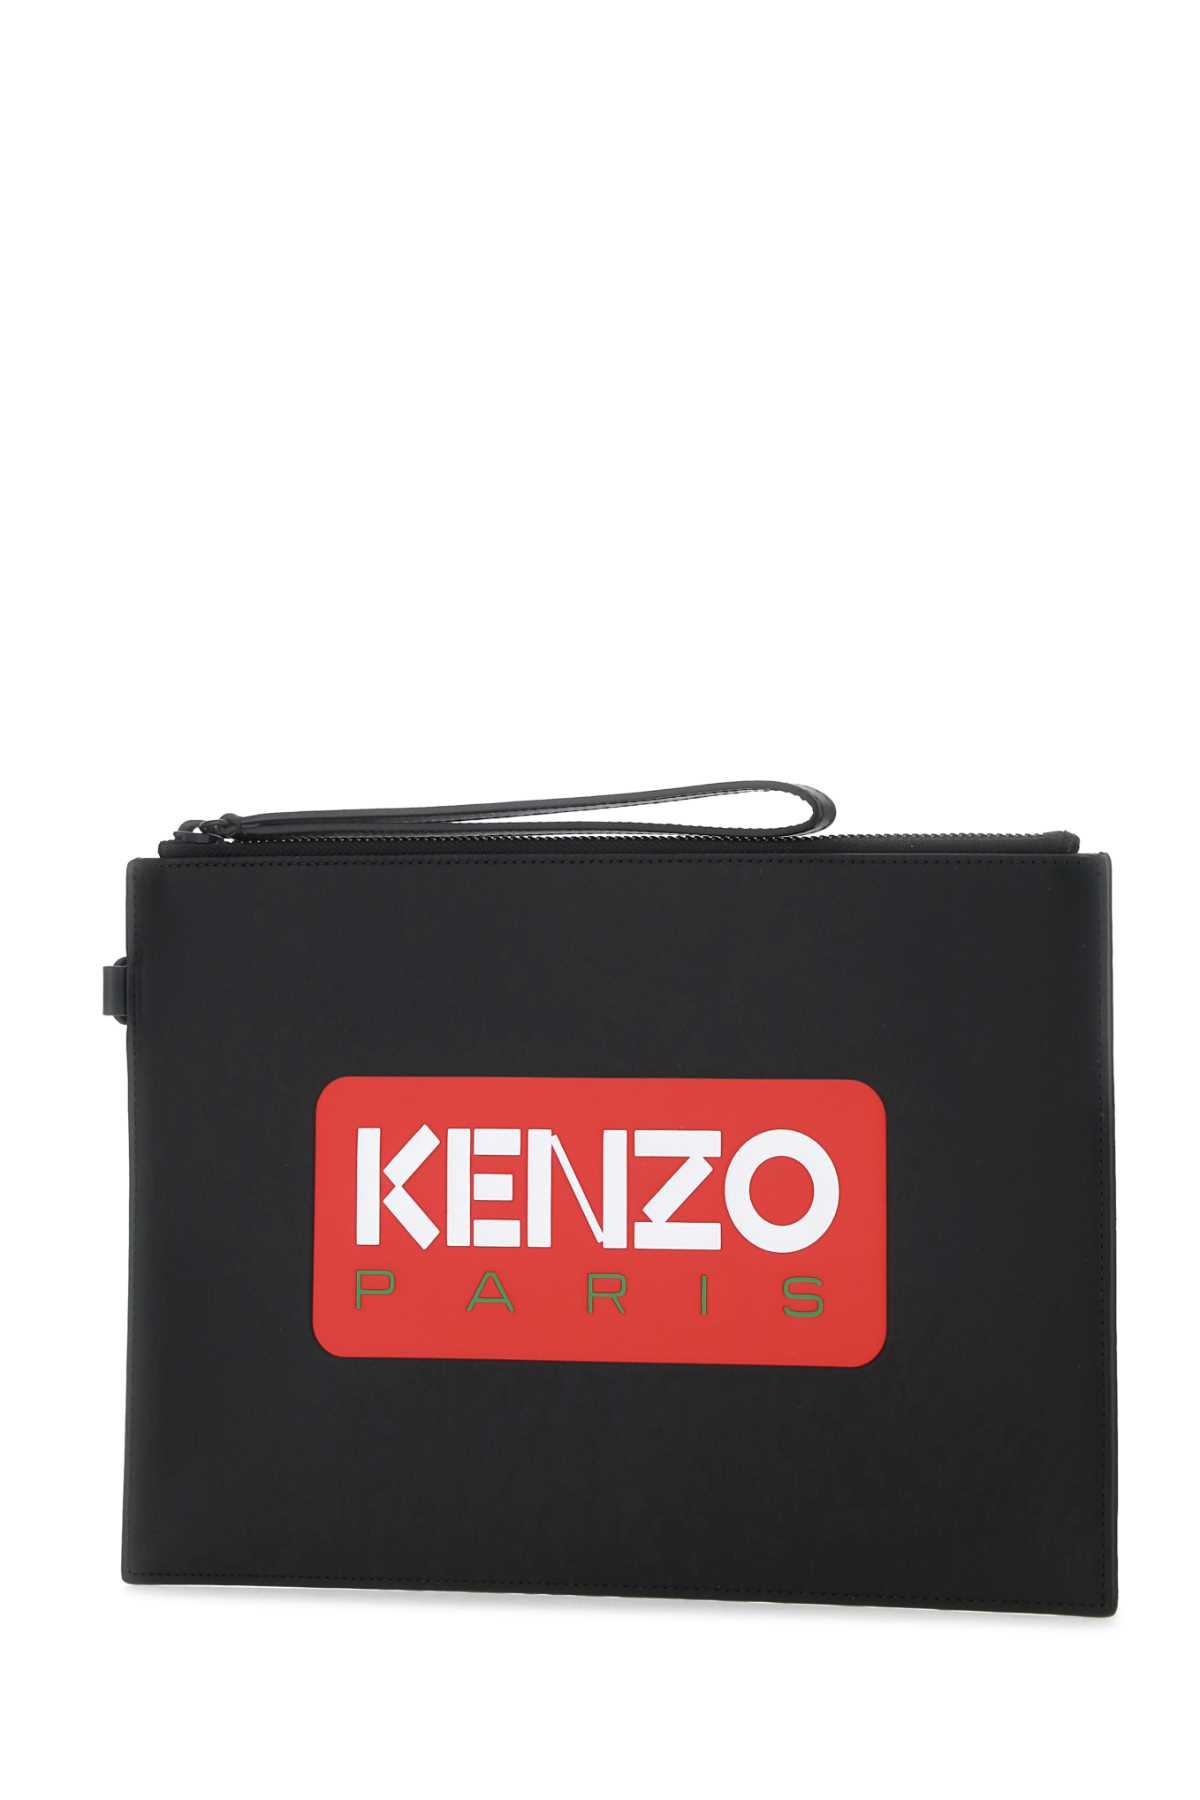 Kenzo Black Leather Large  Paris Clutch In 99